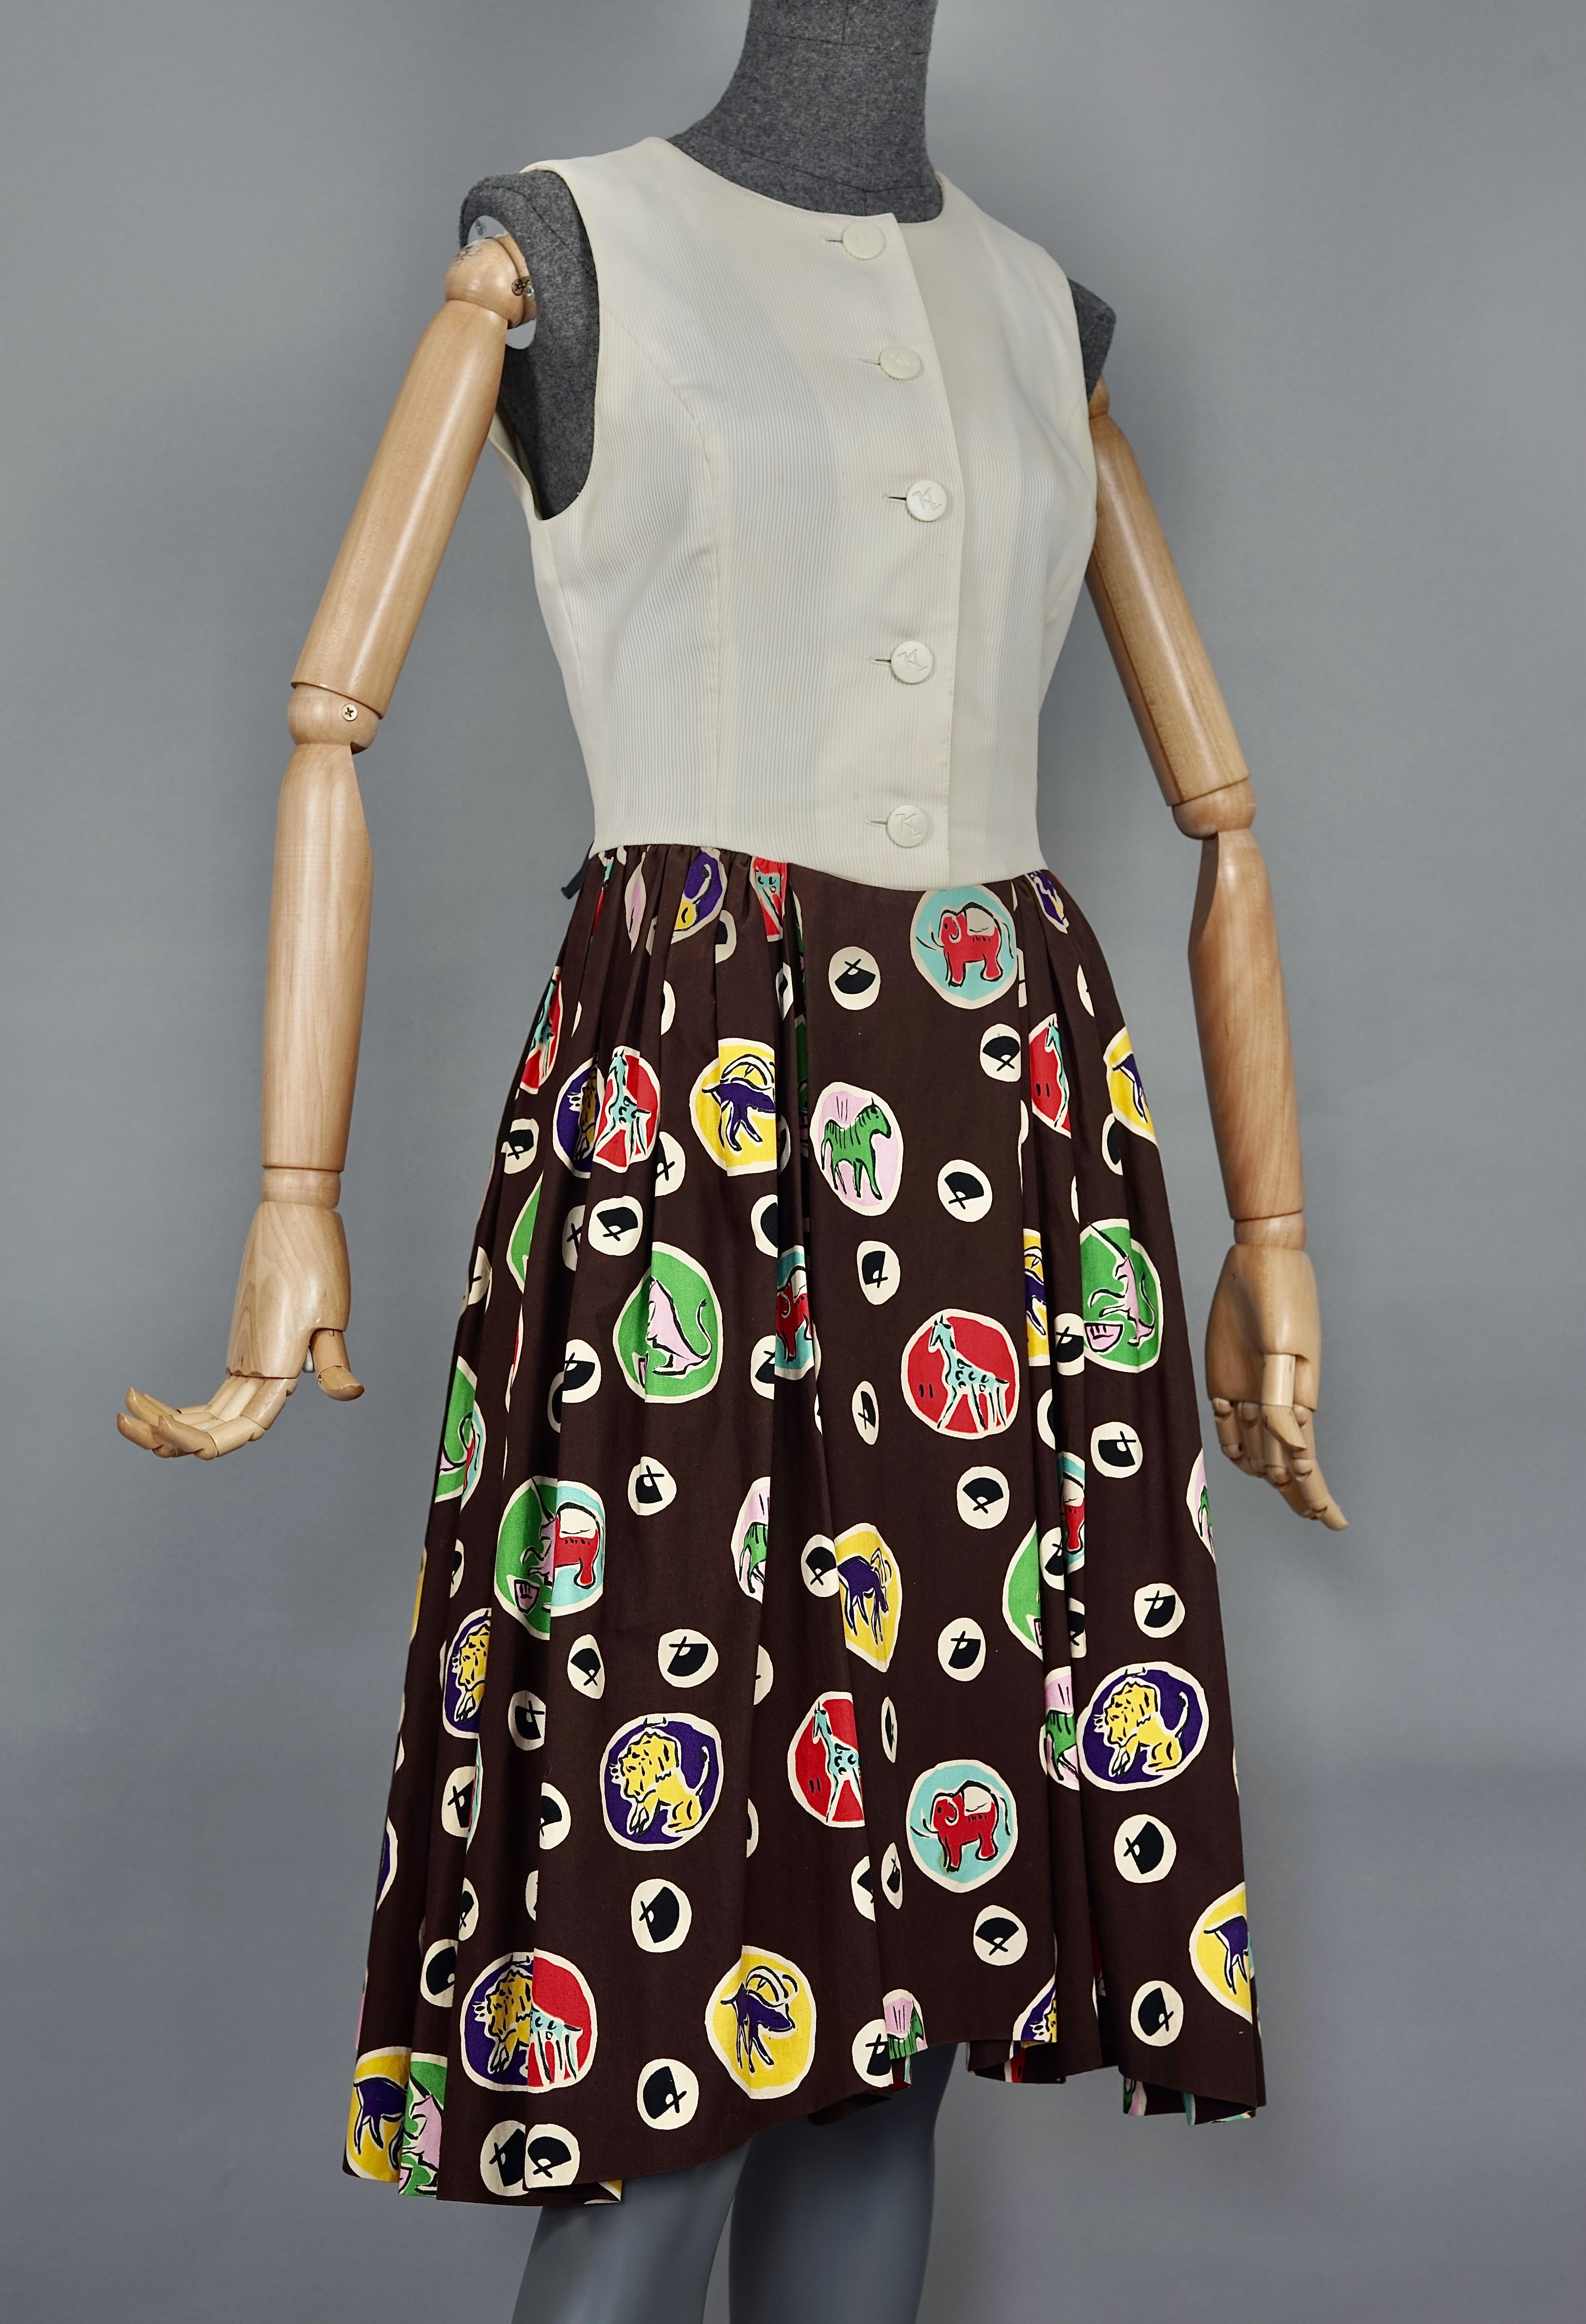 Vintage KARL LAGERFELD Colorful Logo Print Pleated Sleeveless Dress In Good Condition For Sale In Kingersheim, Alsace